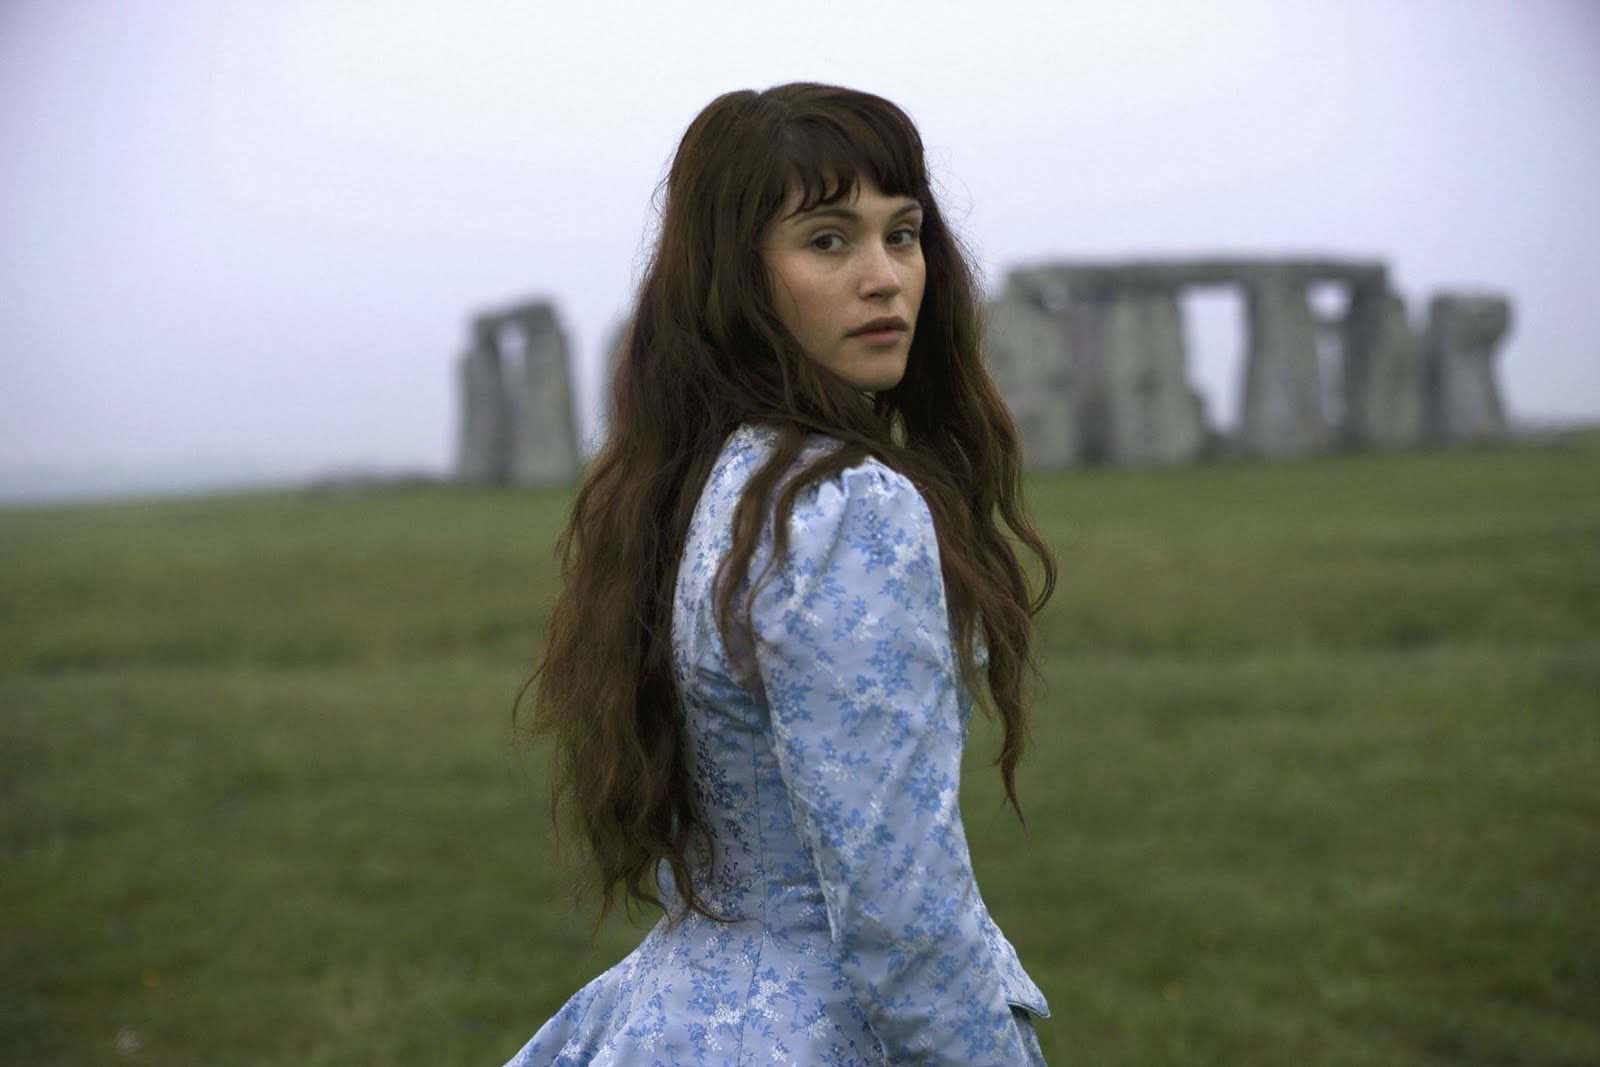 significance of stonehenge in tess of the d urbervilles